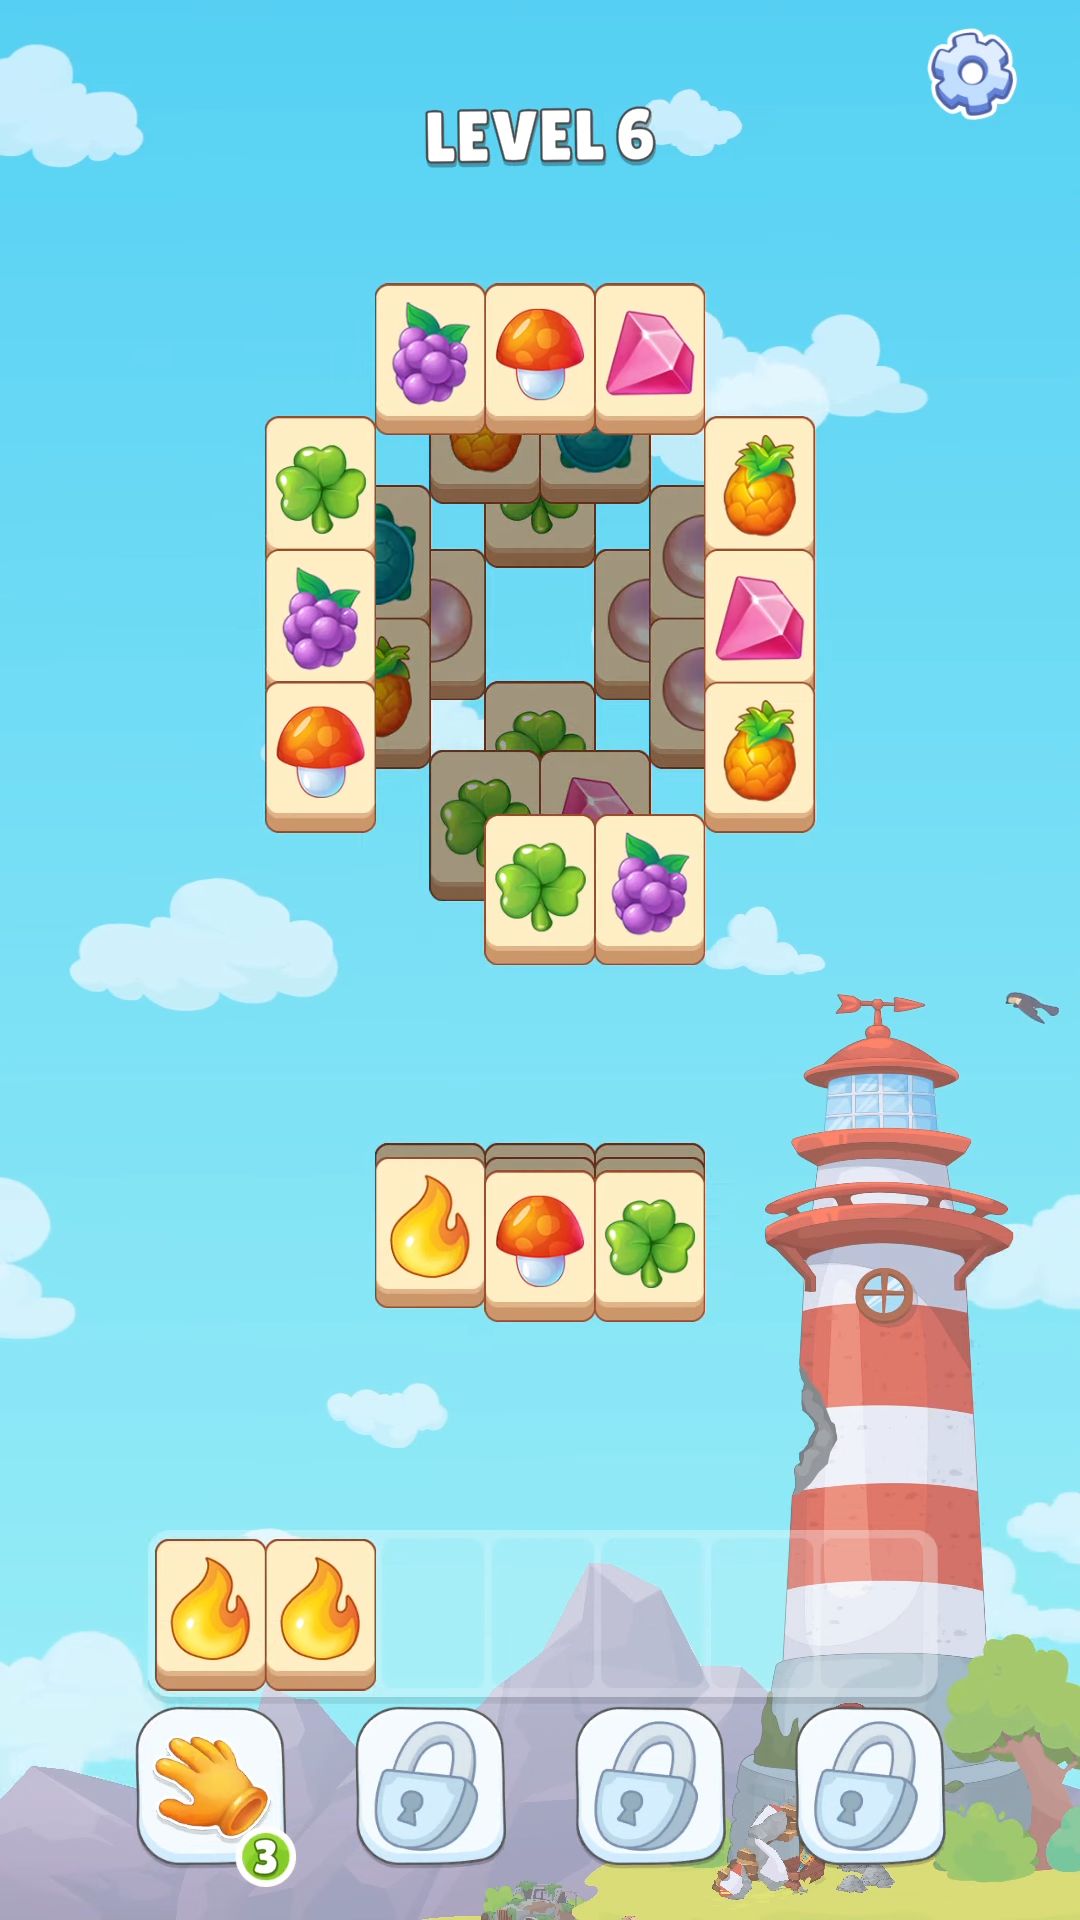 Gameplay of the Andy Volcano: Tile Match Story for Android phone or tablet.